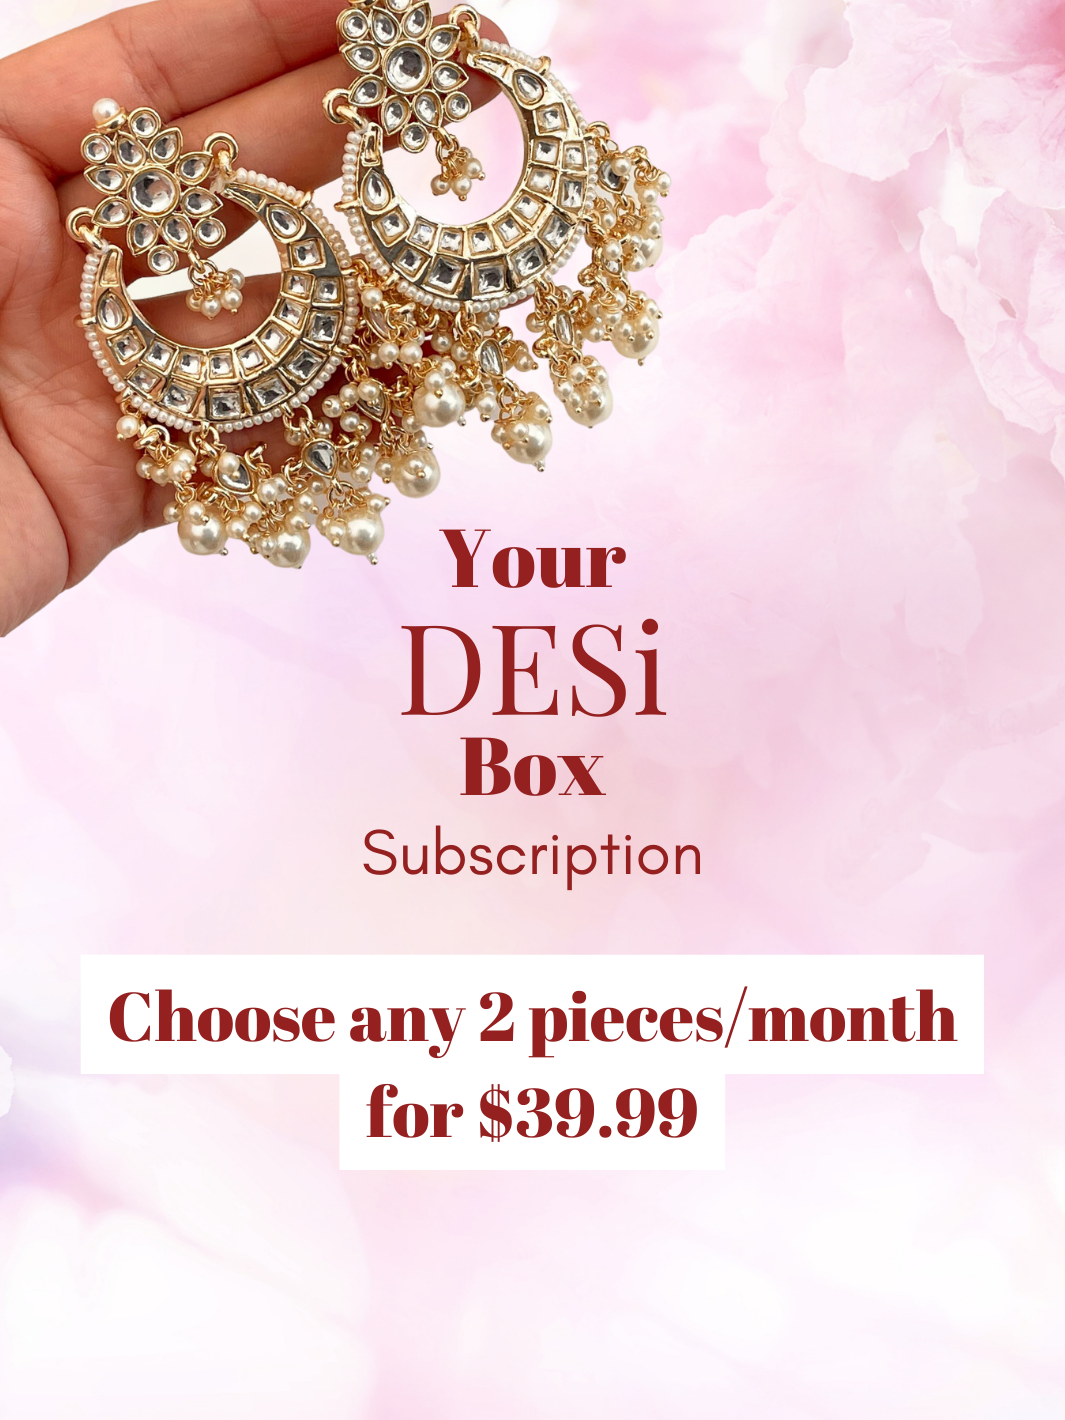 Your Desi Box (Choose any 2 pieces/month for $39.99)